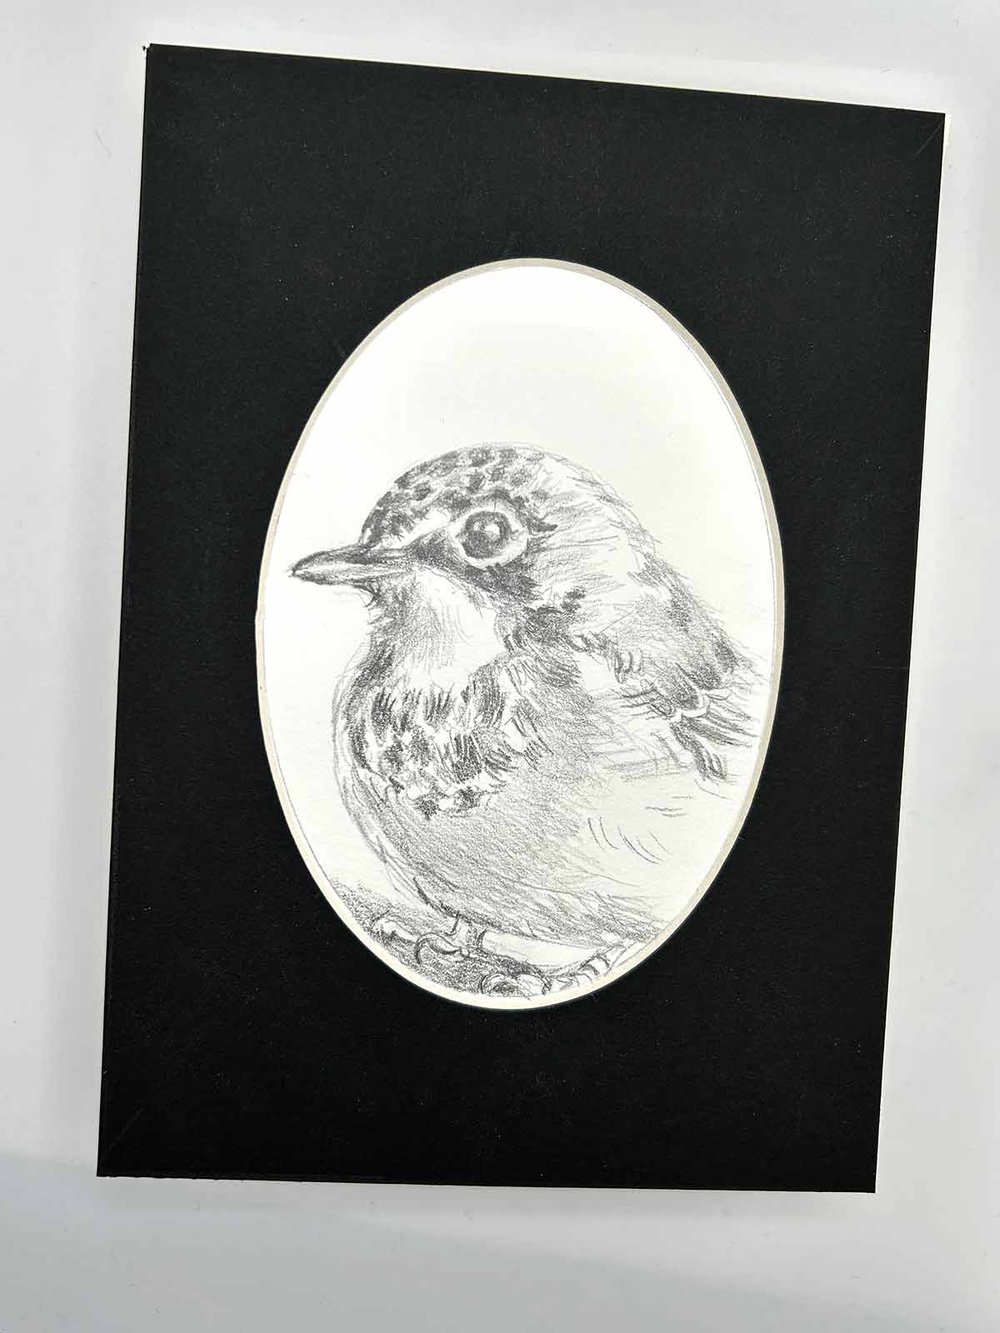 Cardellina canadensis – Canadian Warbler graphite drawing